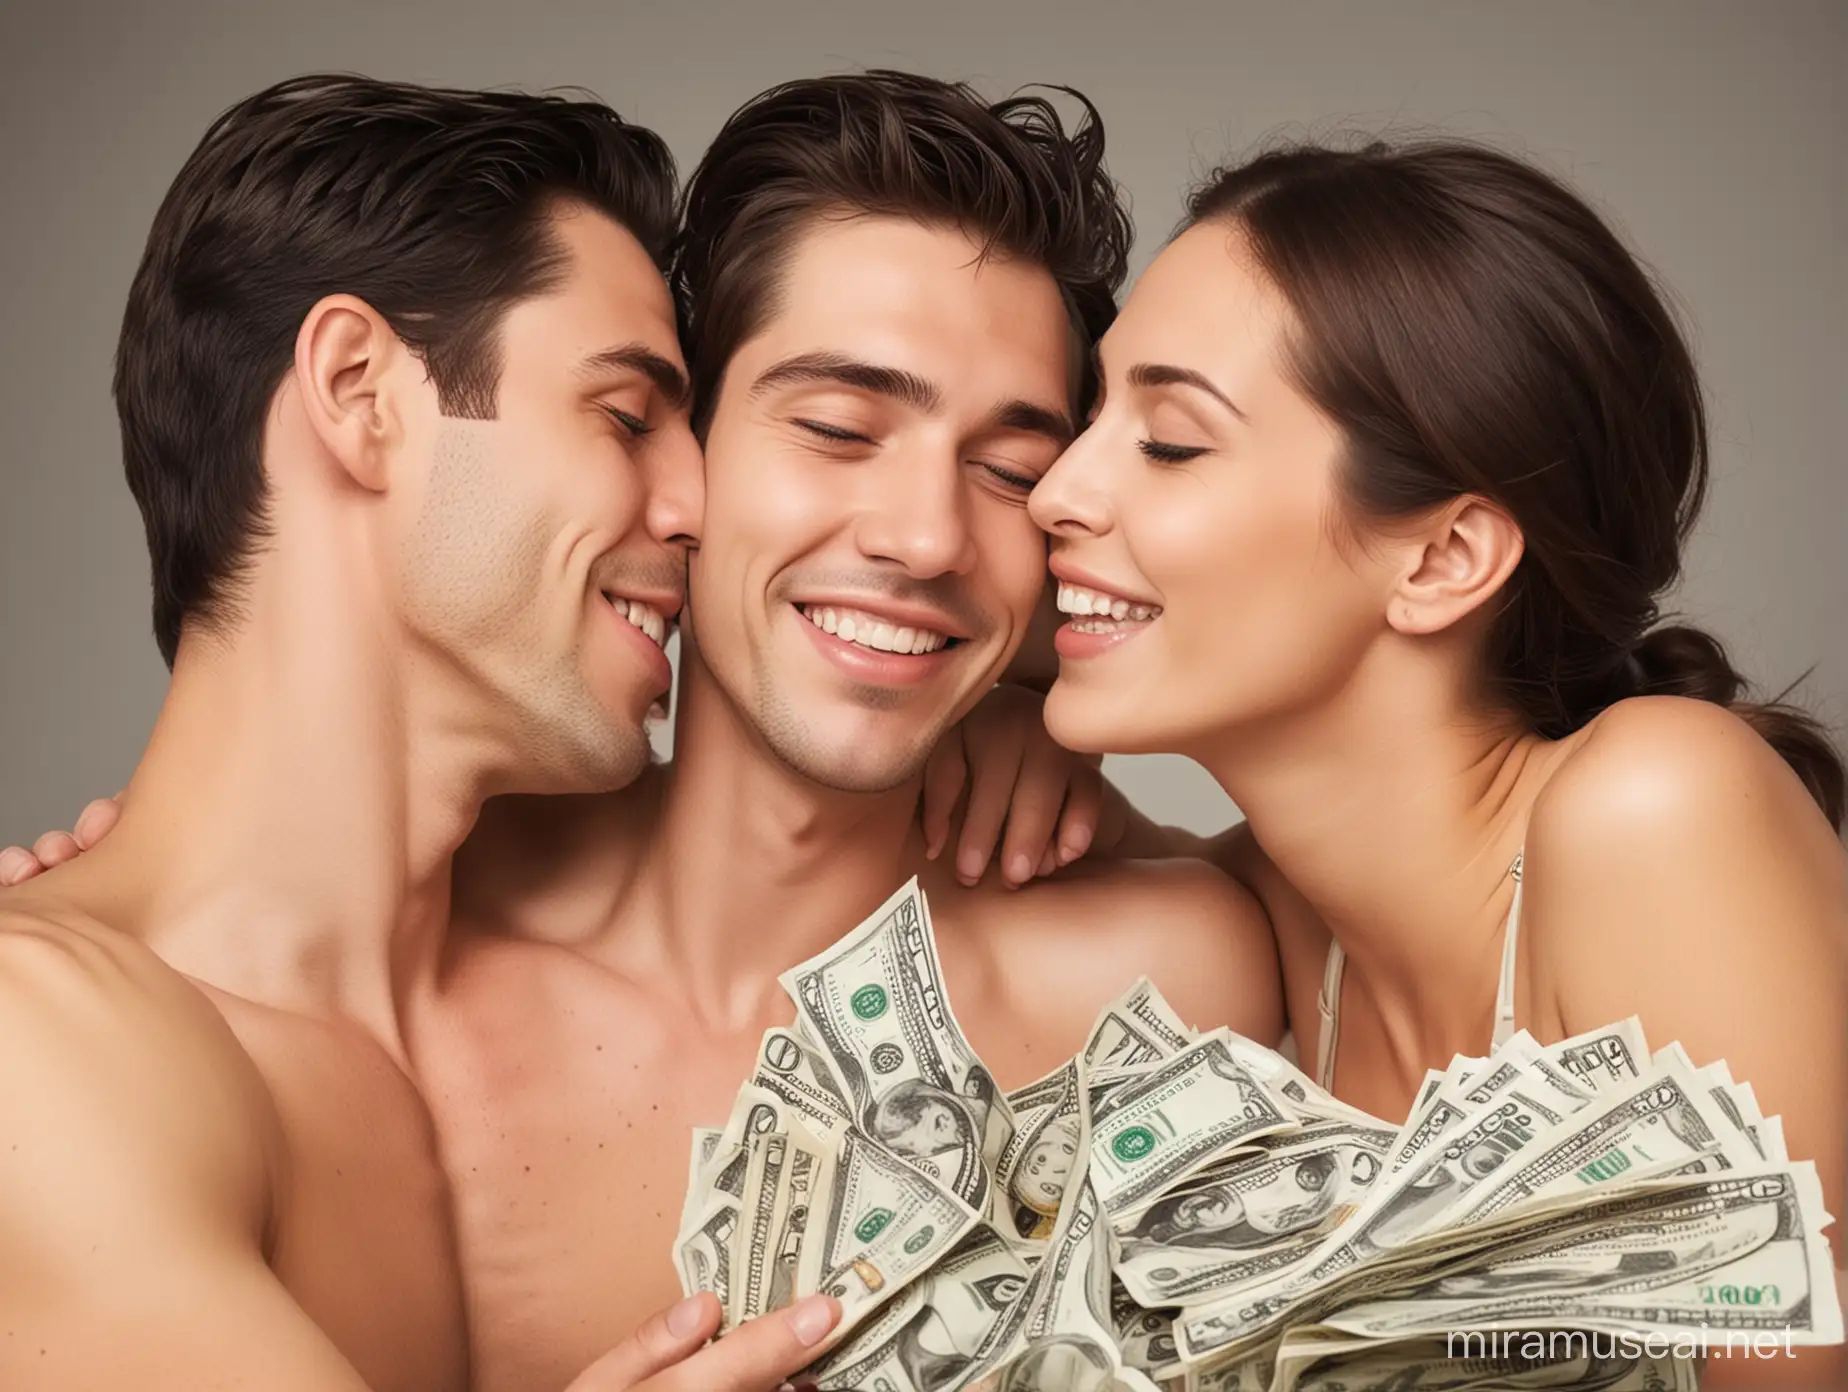 Couple Engaging in Intimate Activity for Financial Gain